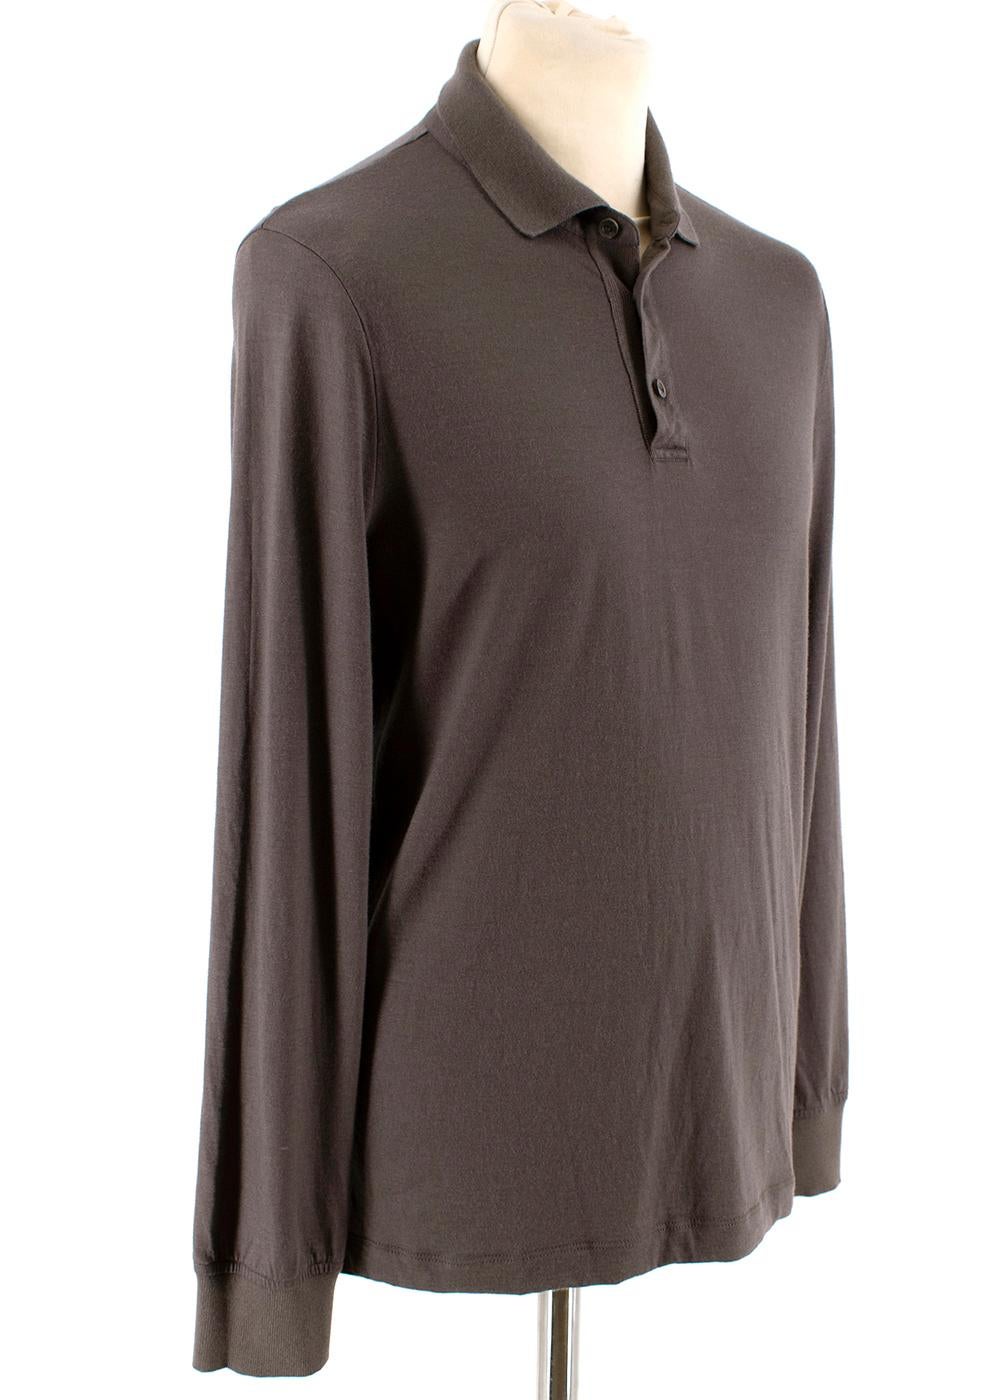 Loro Piana Chocolate Cashmere Knit Polo

- Lightweight
- Subtle heathered coloring 
- Relaxed collar
- Loose fit

Materials:
100% Cashmere

Made in Italy
Professional dry clean only

Measurements:
Measurements are taken laying flat, seam to seam.